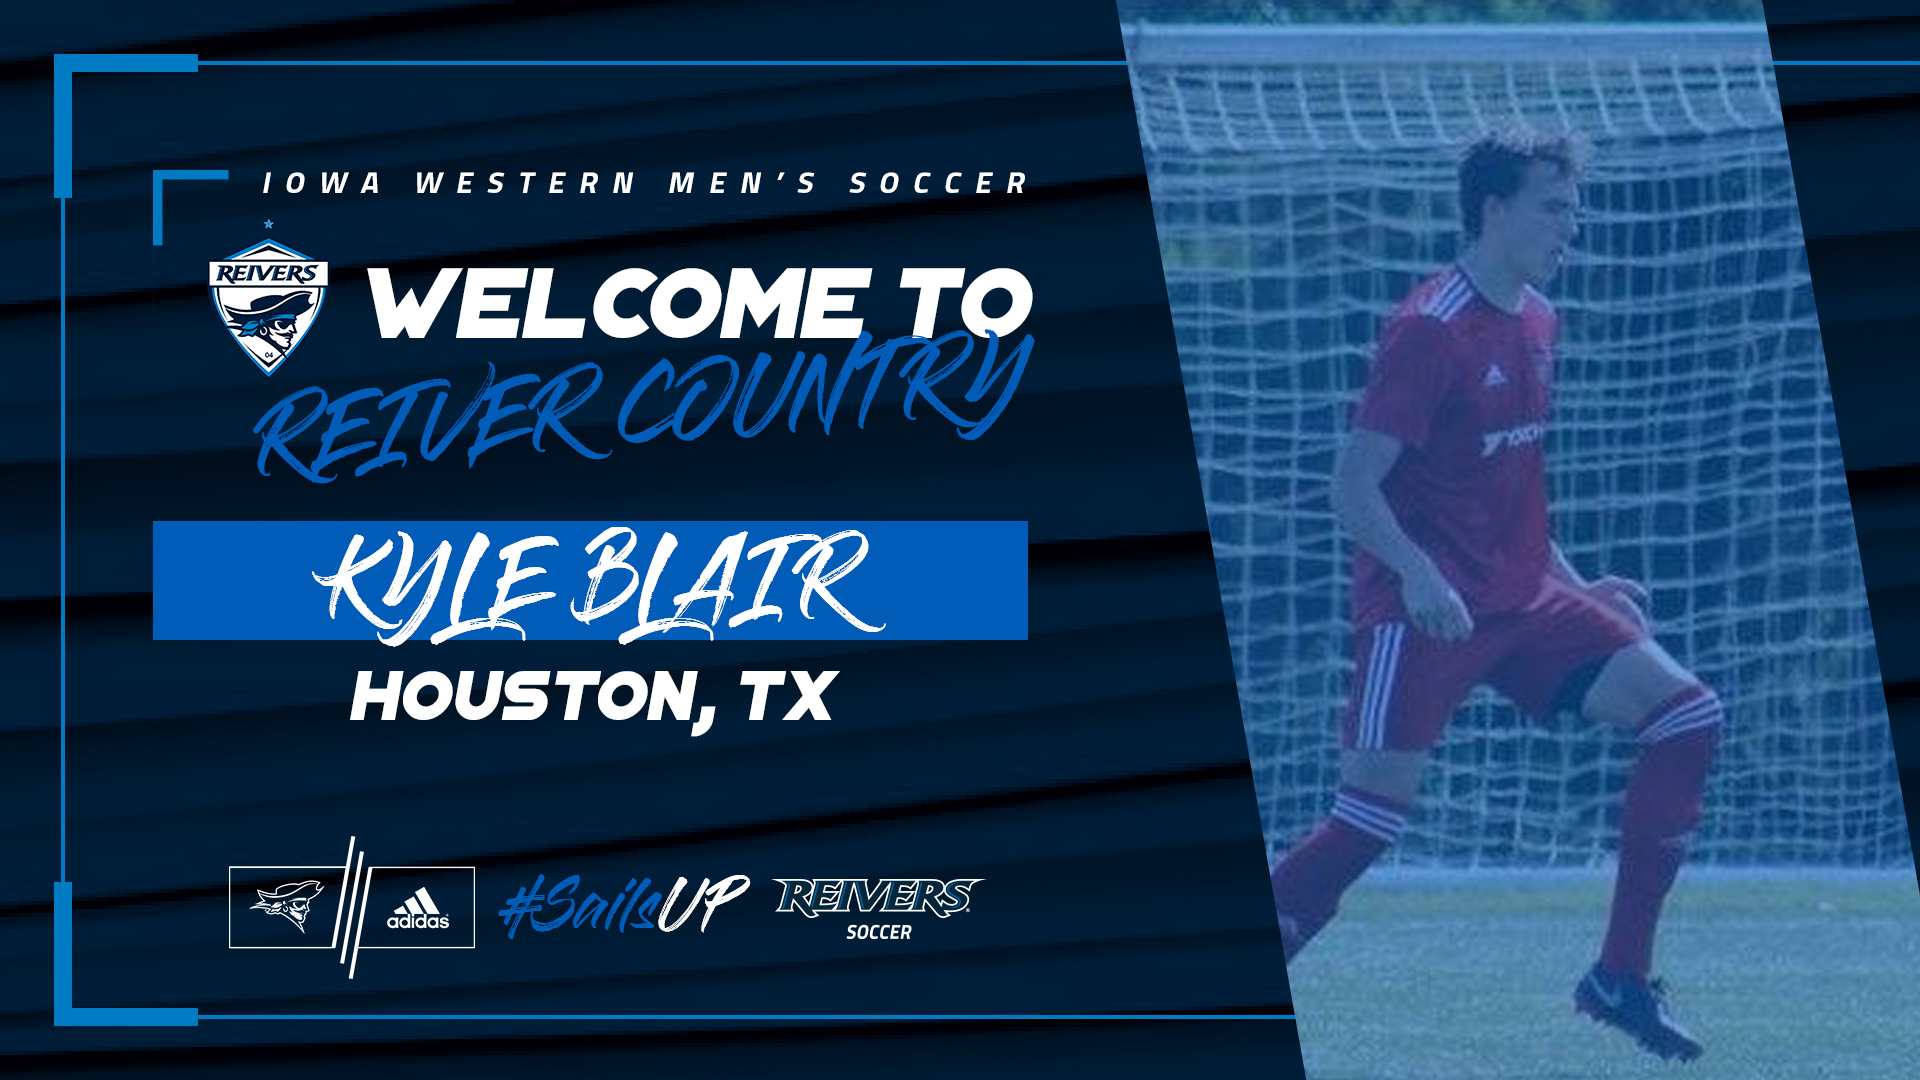 Kyle Blair to join Reiver men's soccer in fall